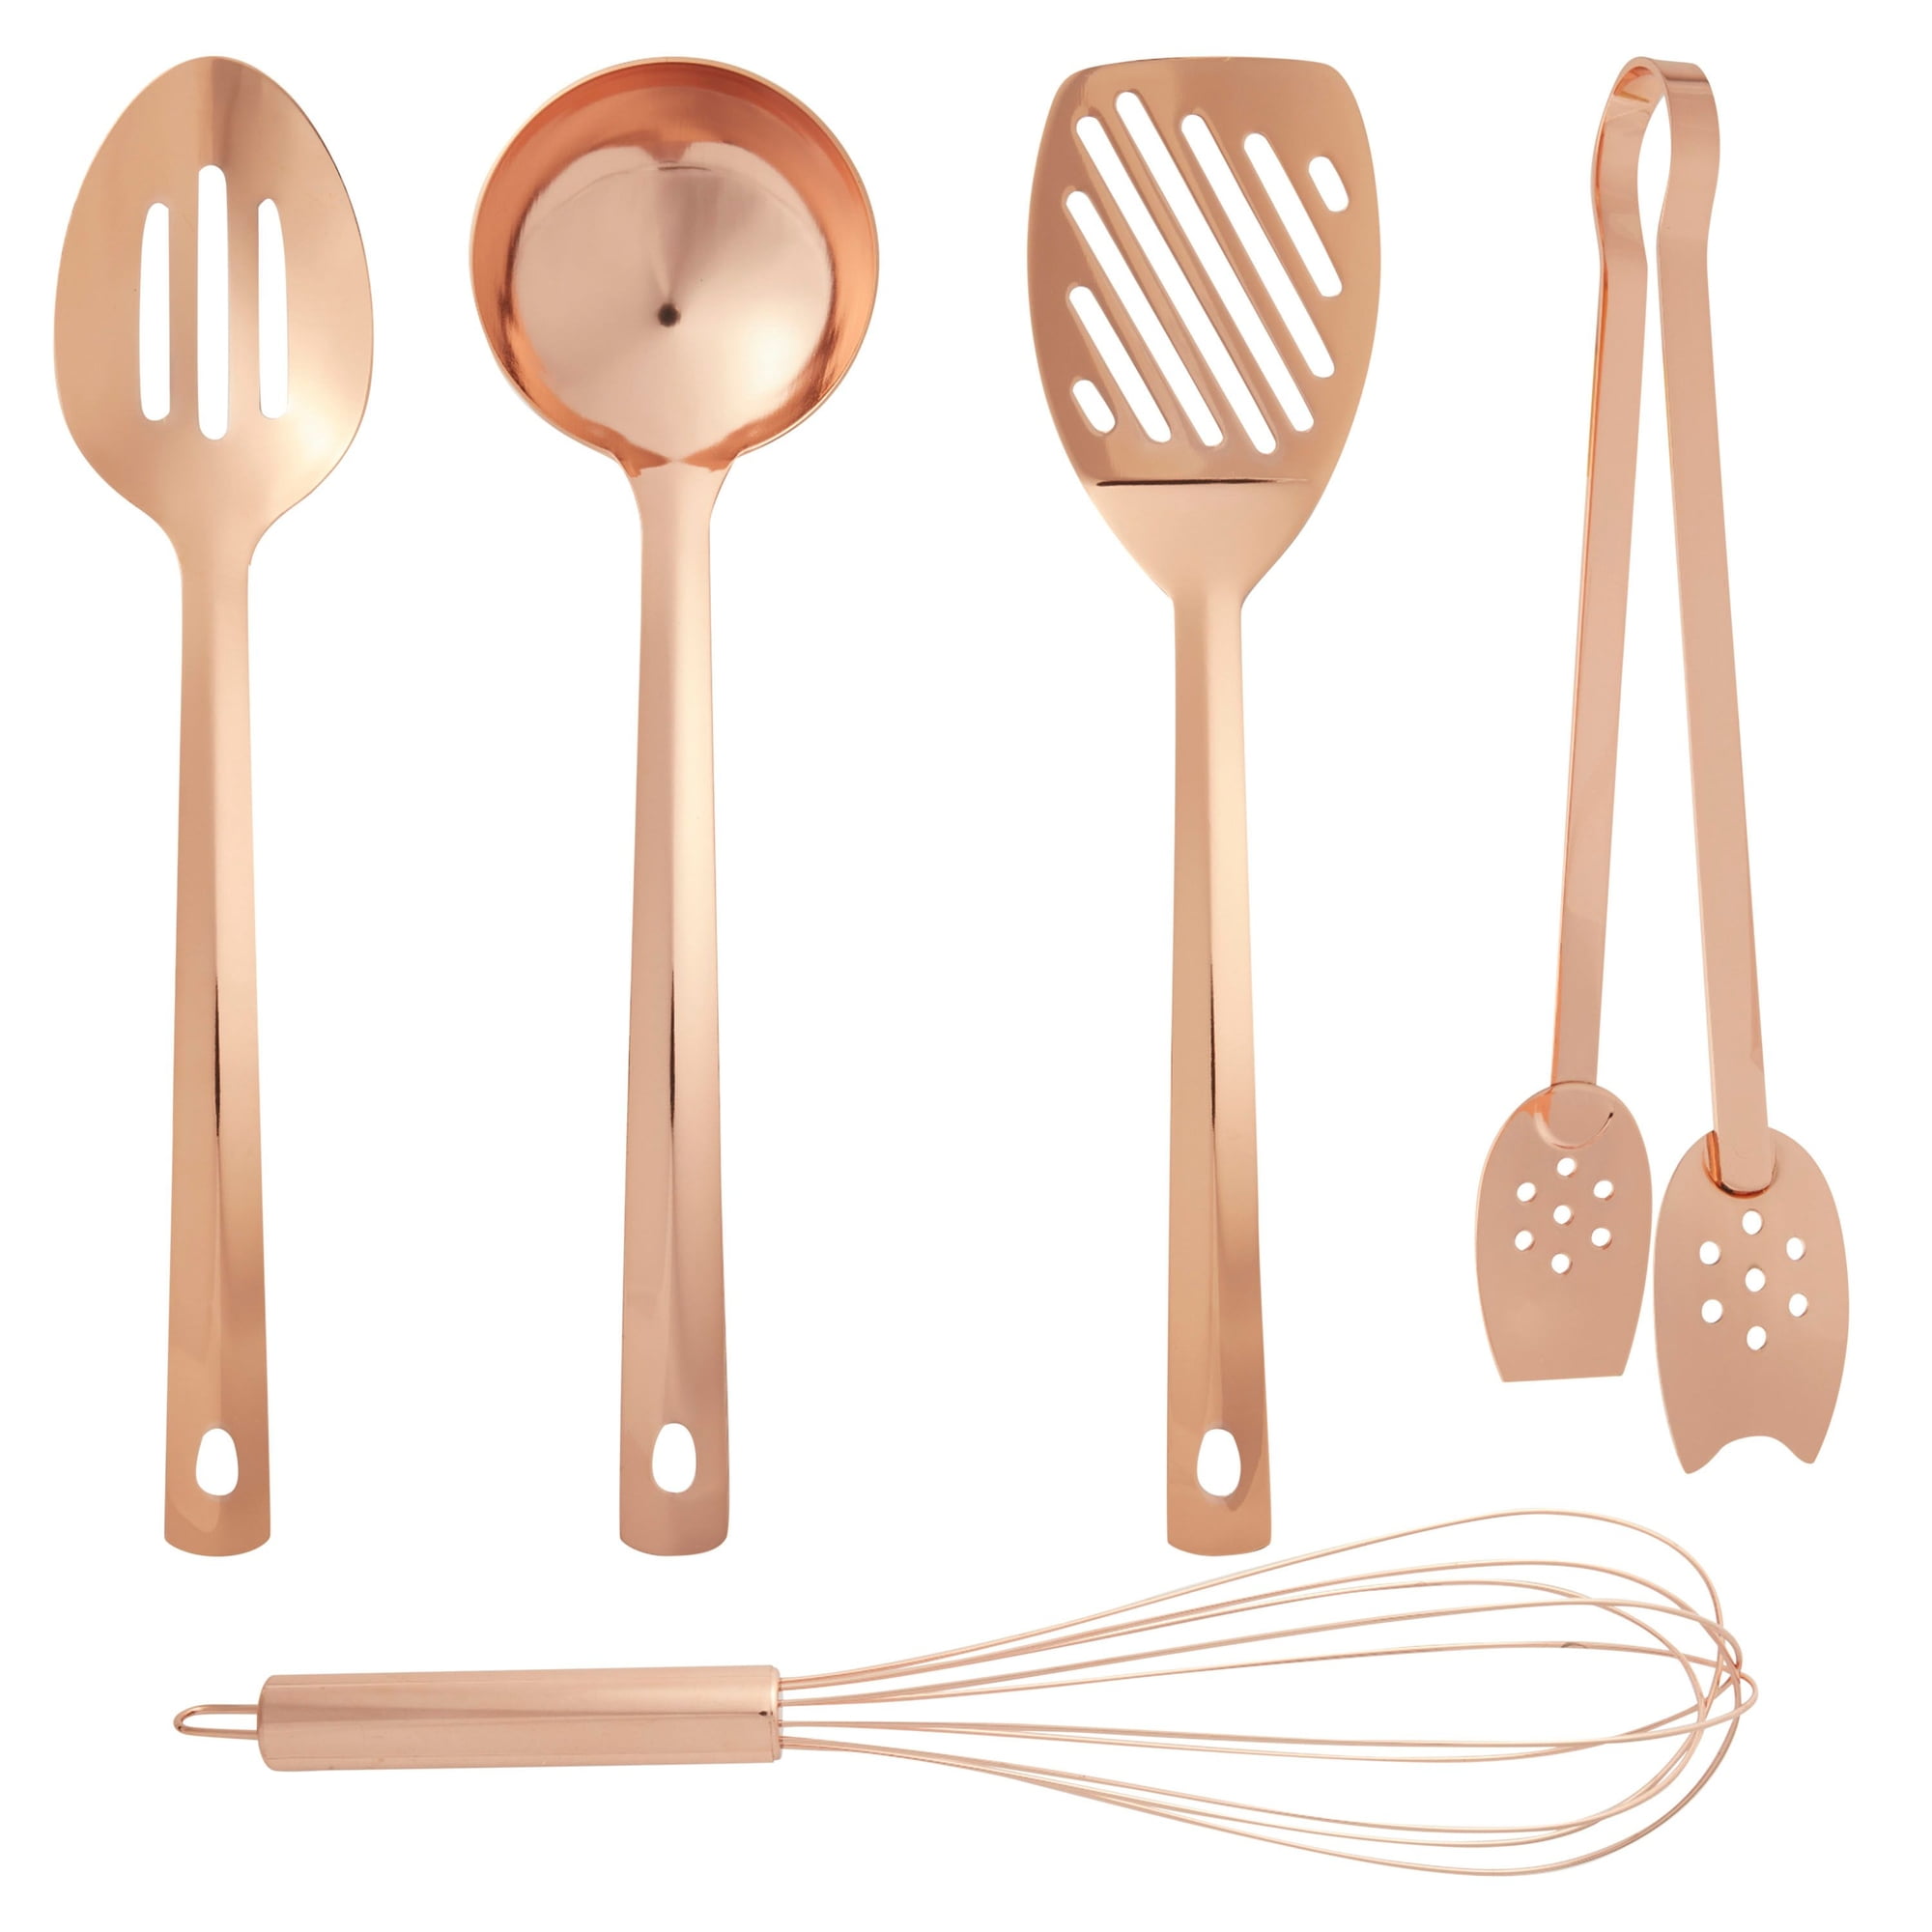  White and Copper Kitchen Utensils - 18 PC Copper Cooking Utensils  Set Includes Copper Utensil Holder, White & Copper Measuring Cups and  Spoons, Rose Gold Kitchen Utensils - Copper Kitchen Accessories 